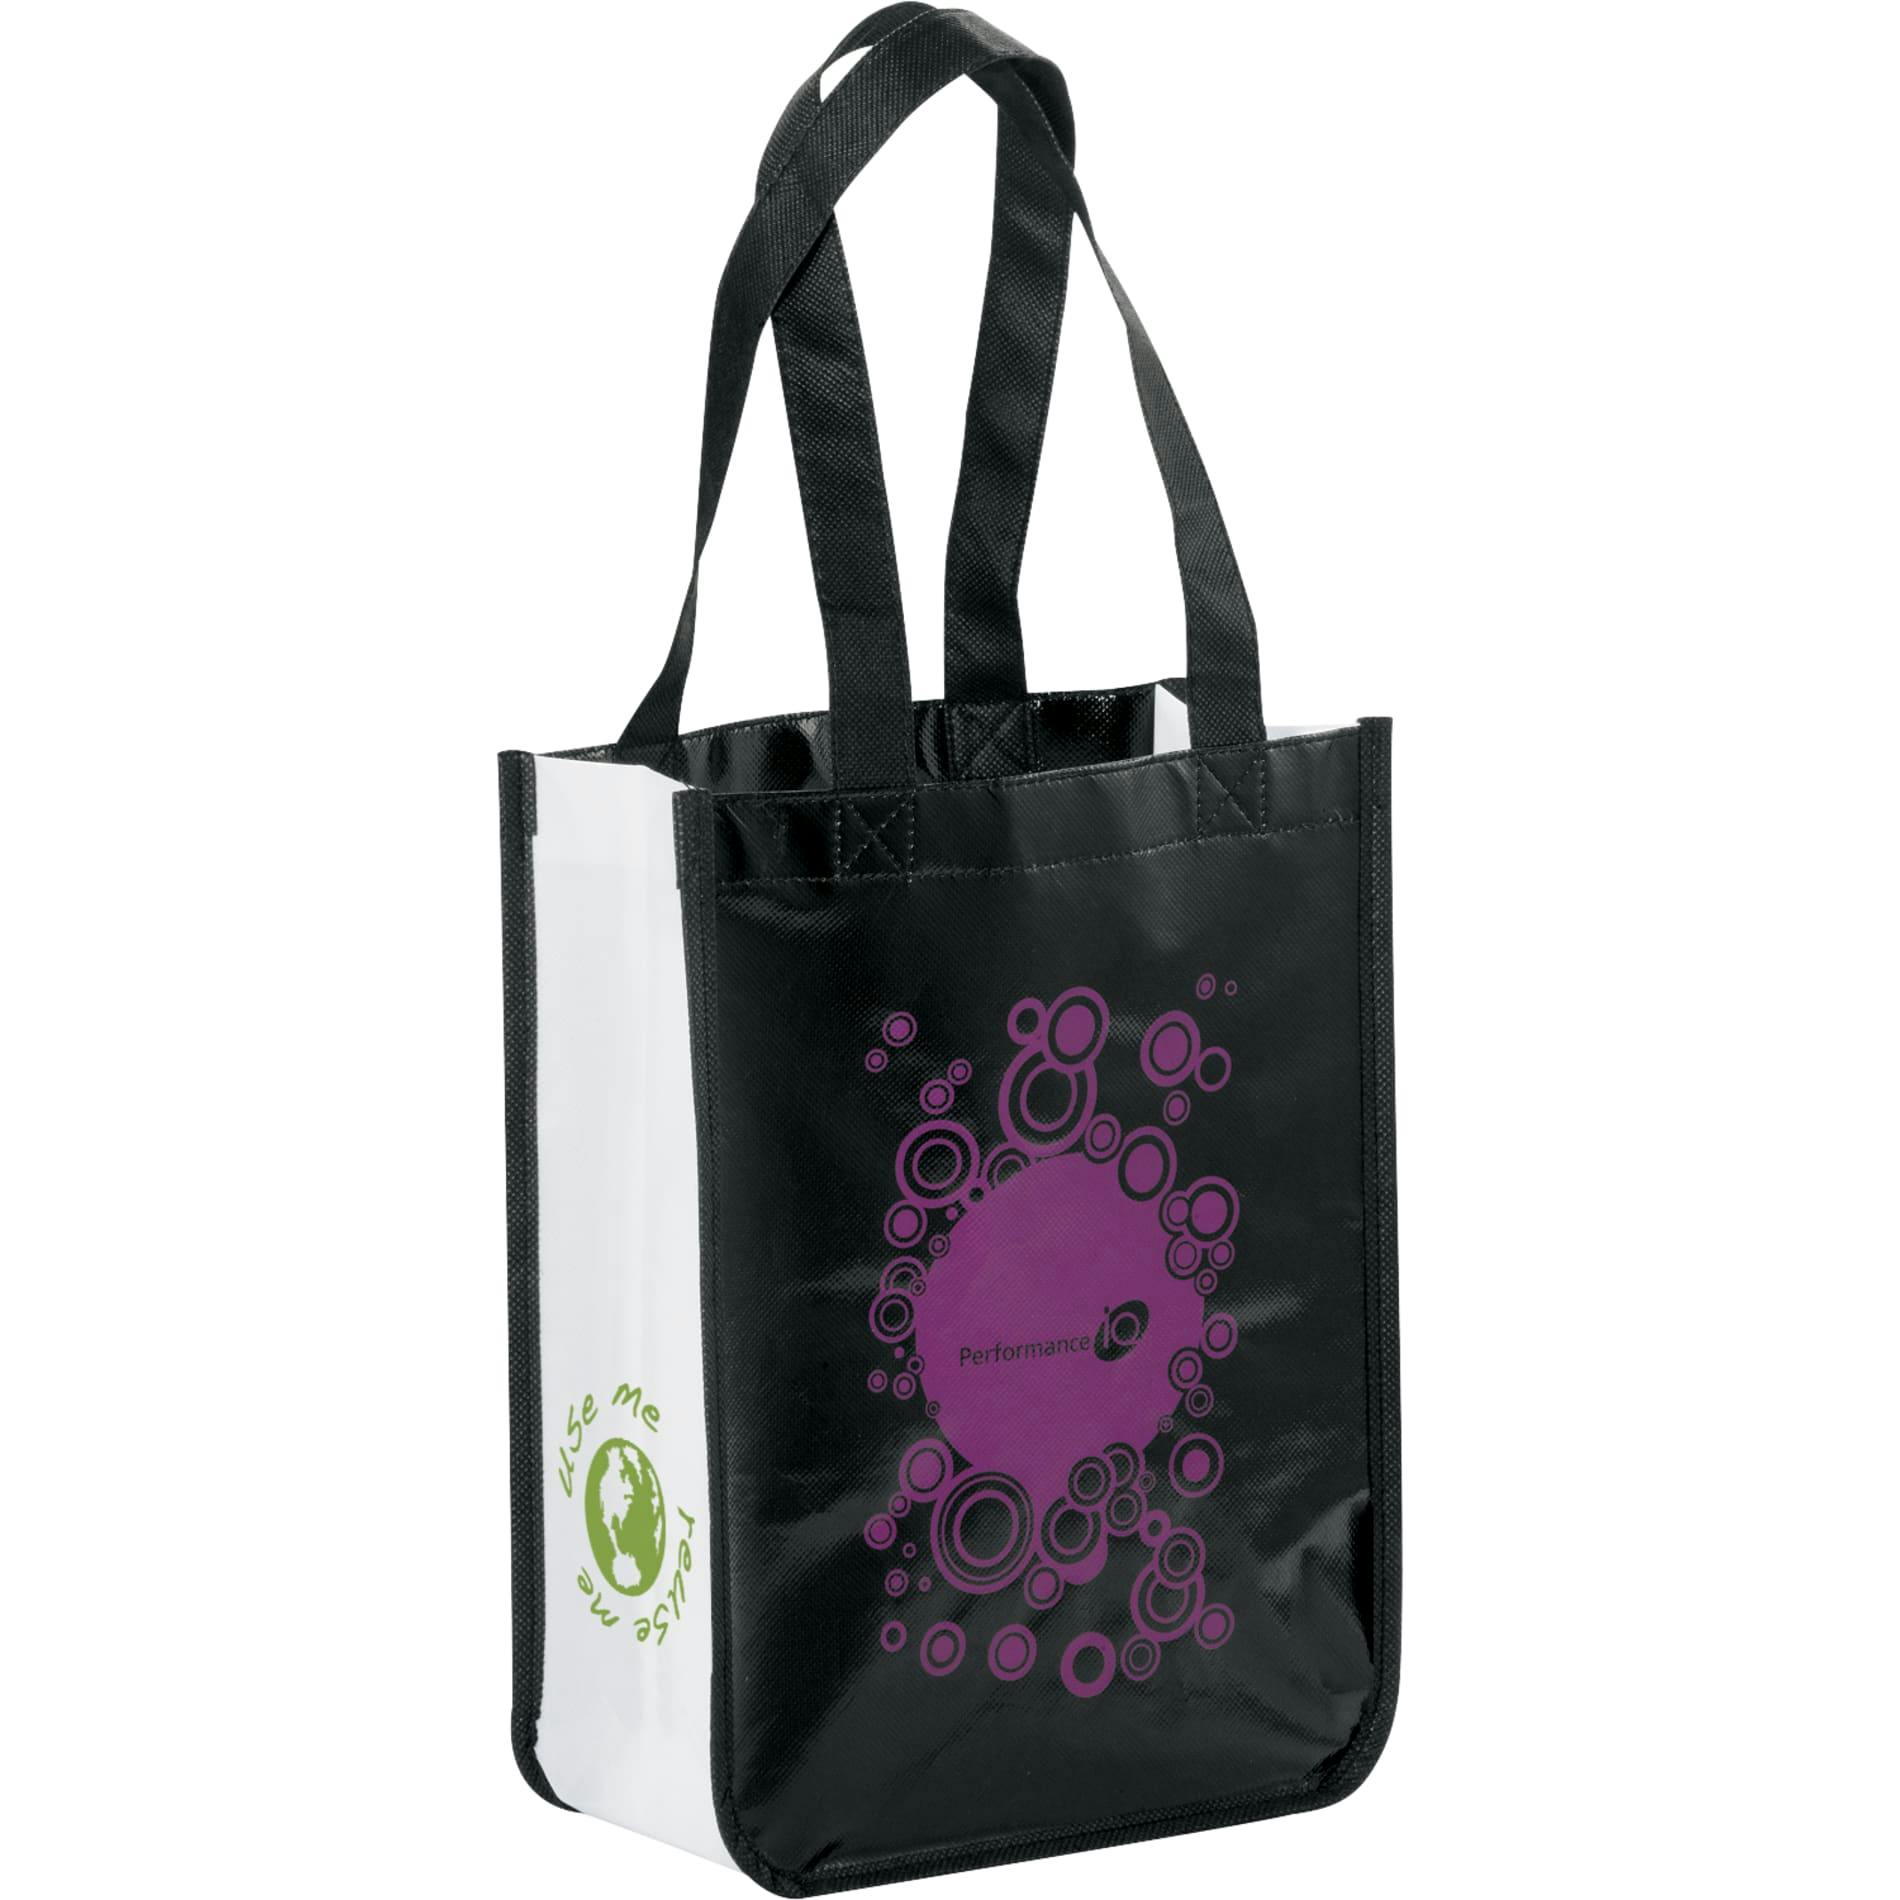 Gloss Laminated Non-Woven Gift Tote - additional Image 1